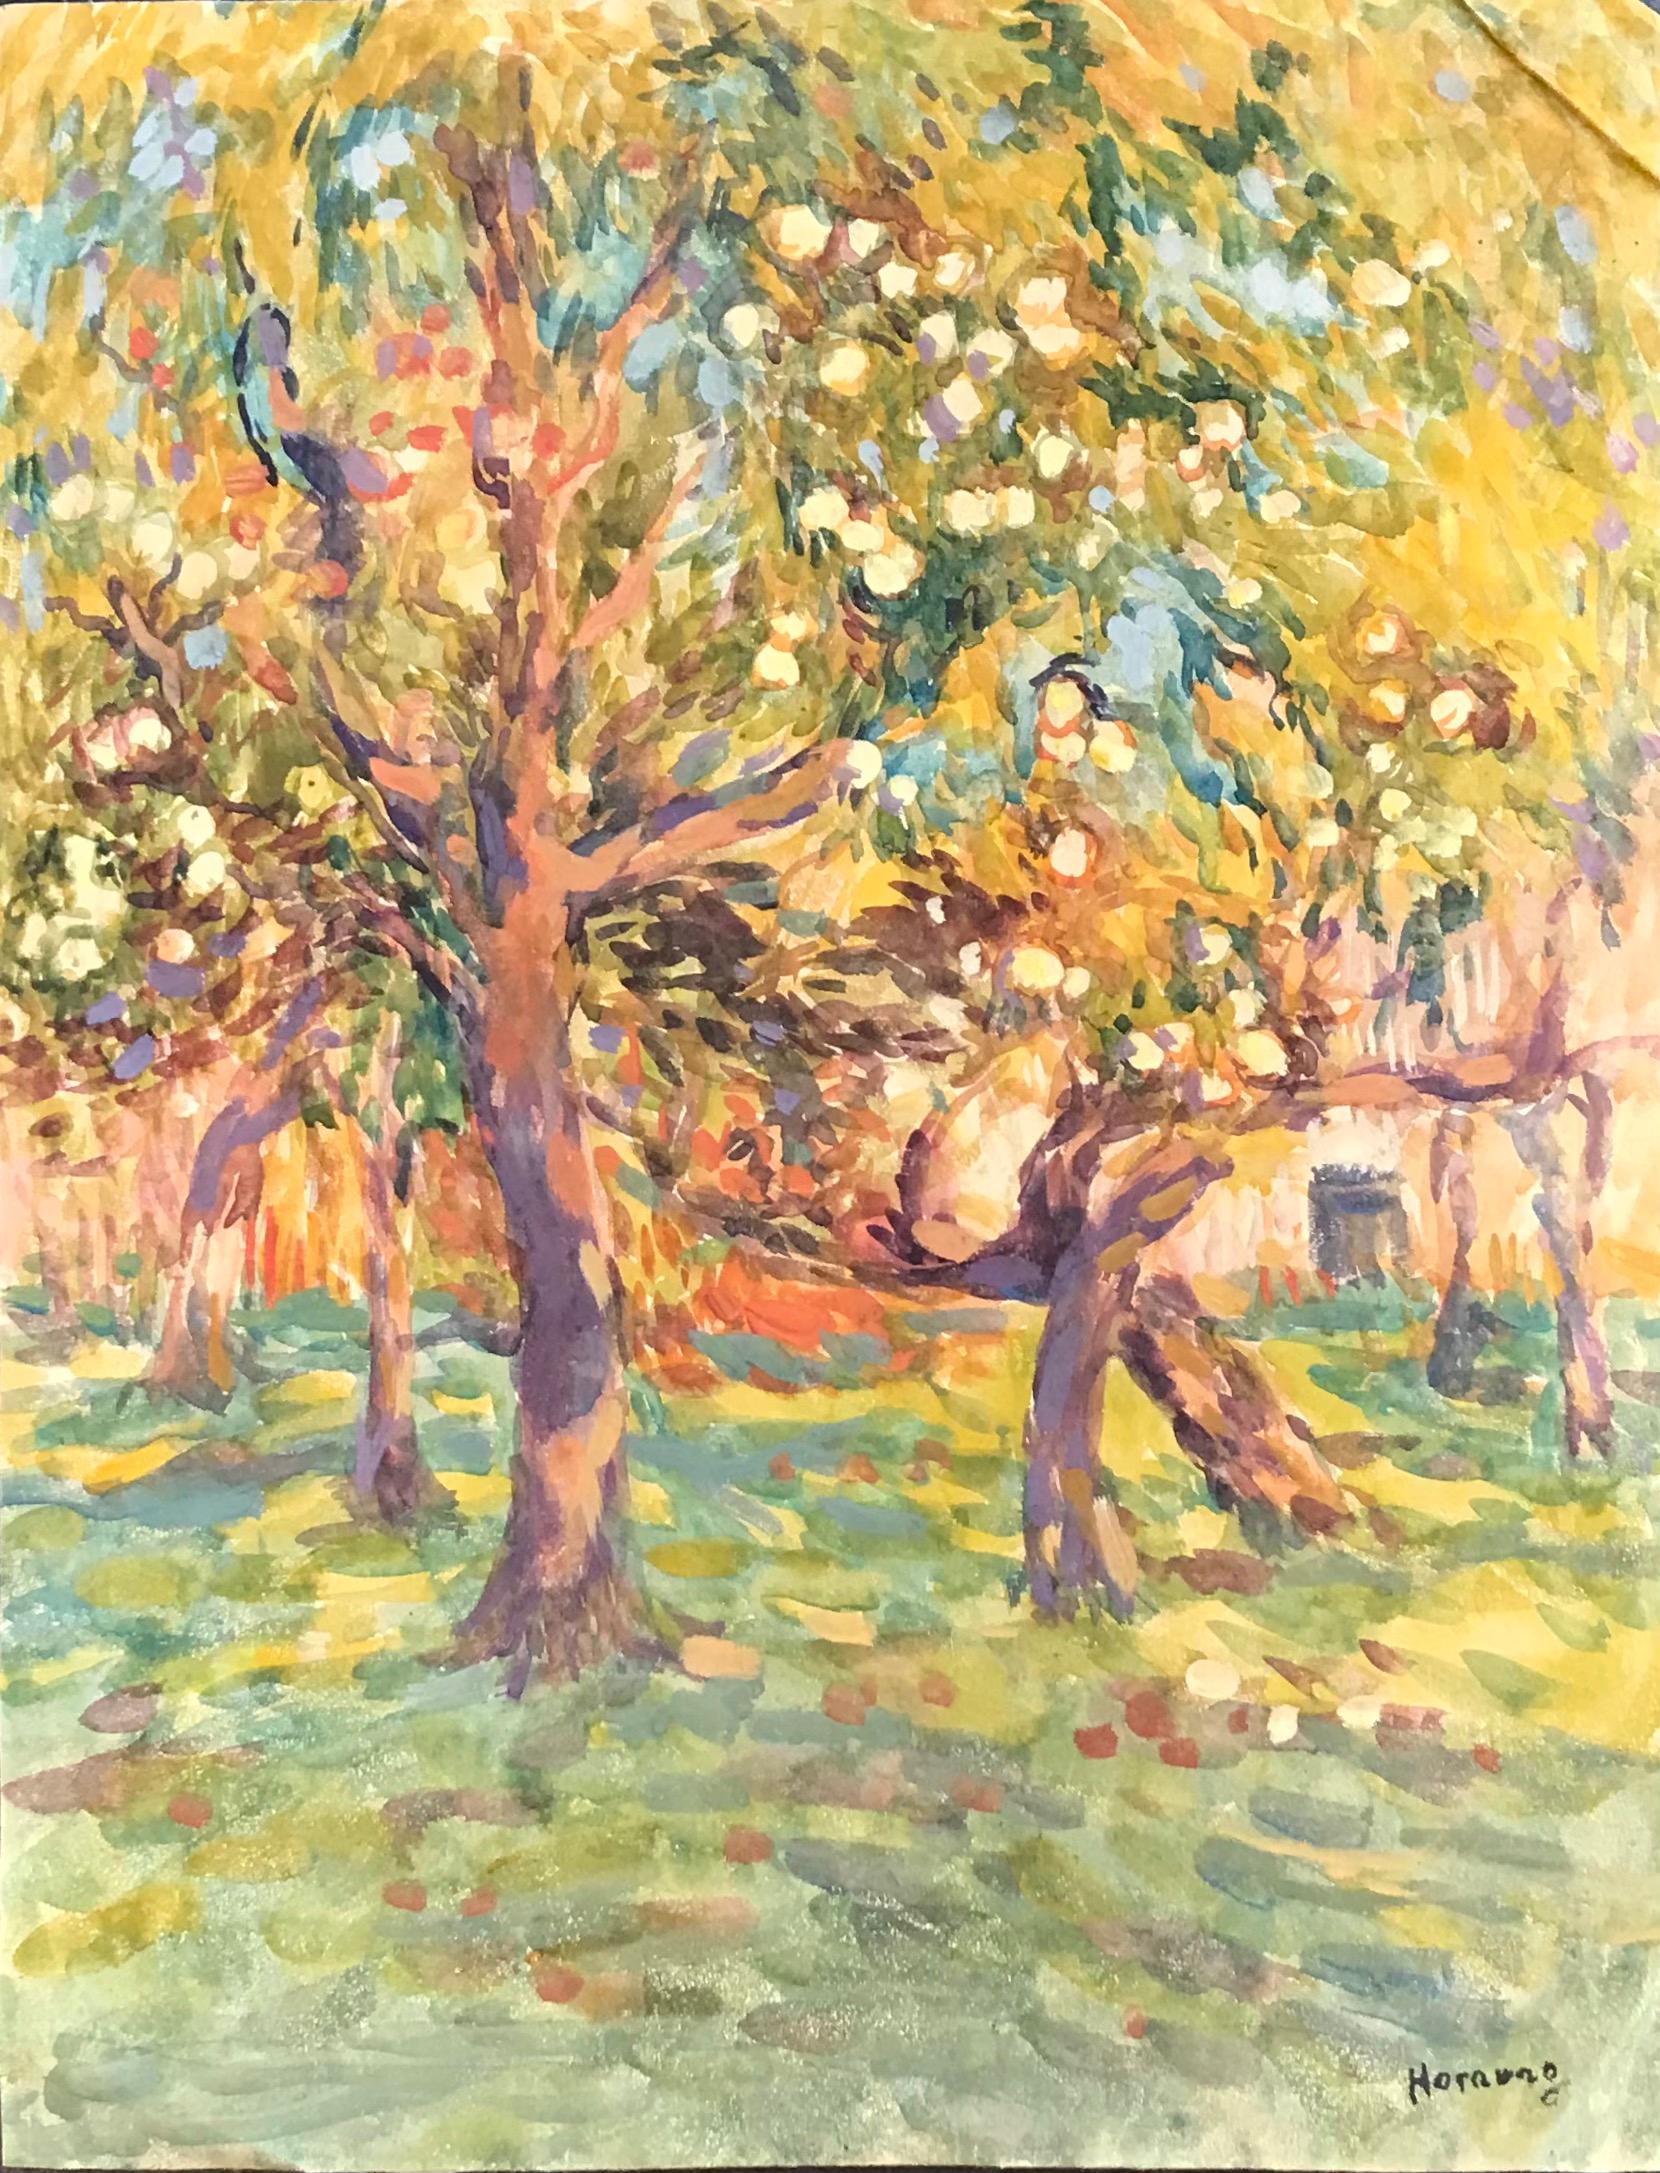 Charles Émile Hornung Landscape Painting - "Orchard" by Emile Hornung - Watercolor on paper 33x44 cm